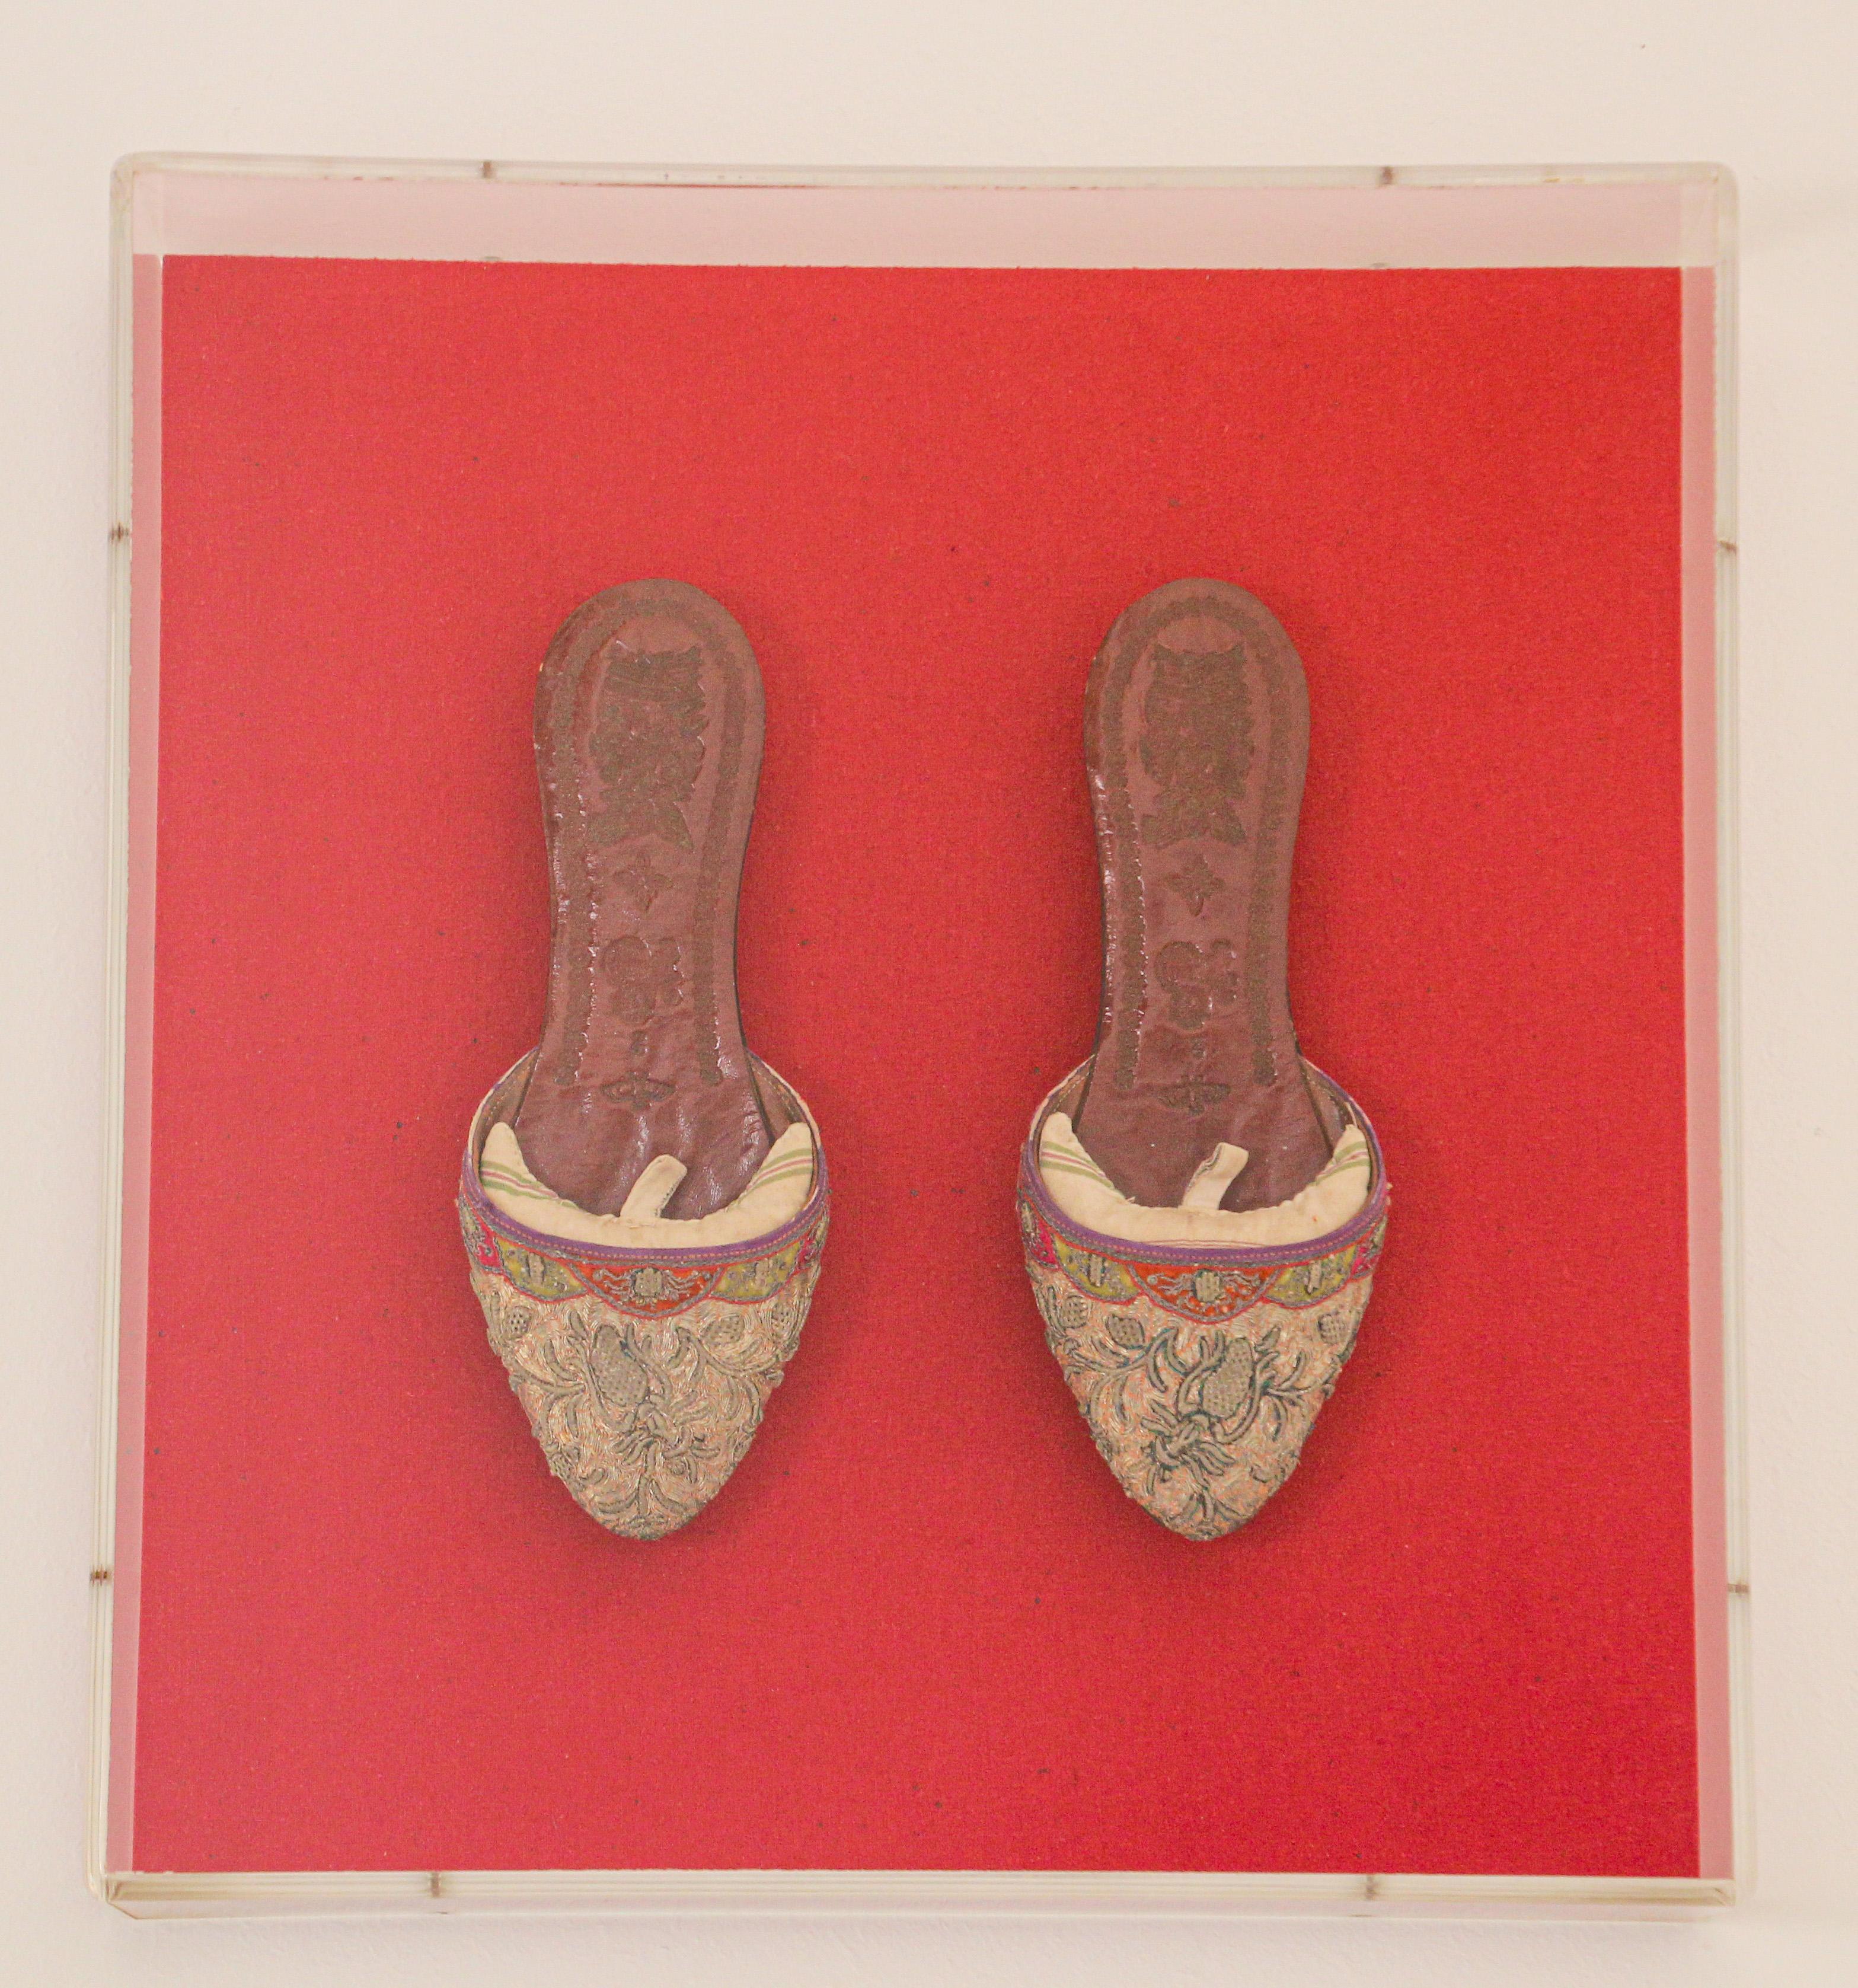 Framed in a Lucite box, pair of Asian Chinese leather and silk shoes embroidered and adorned with gold thread.
Exquisite pair of collectible antique shoes mounted and presented on a red background.